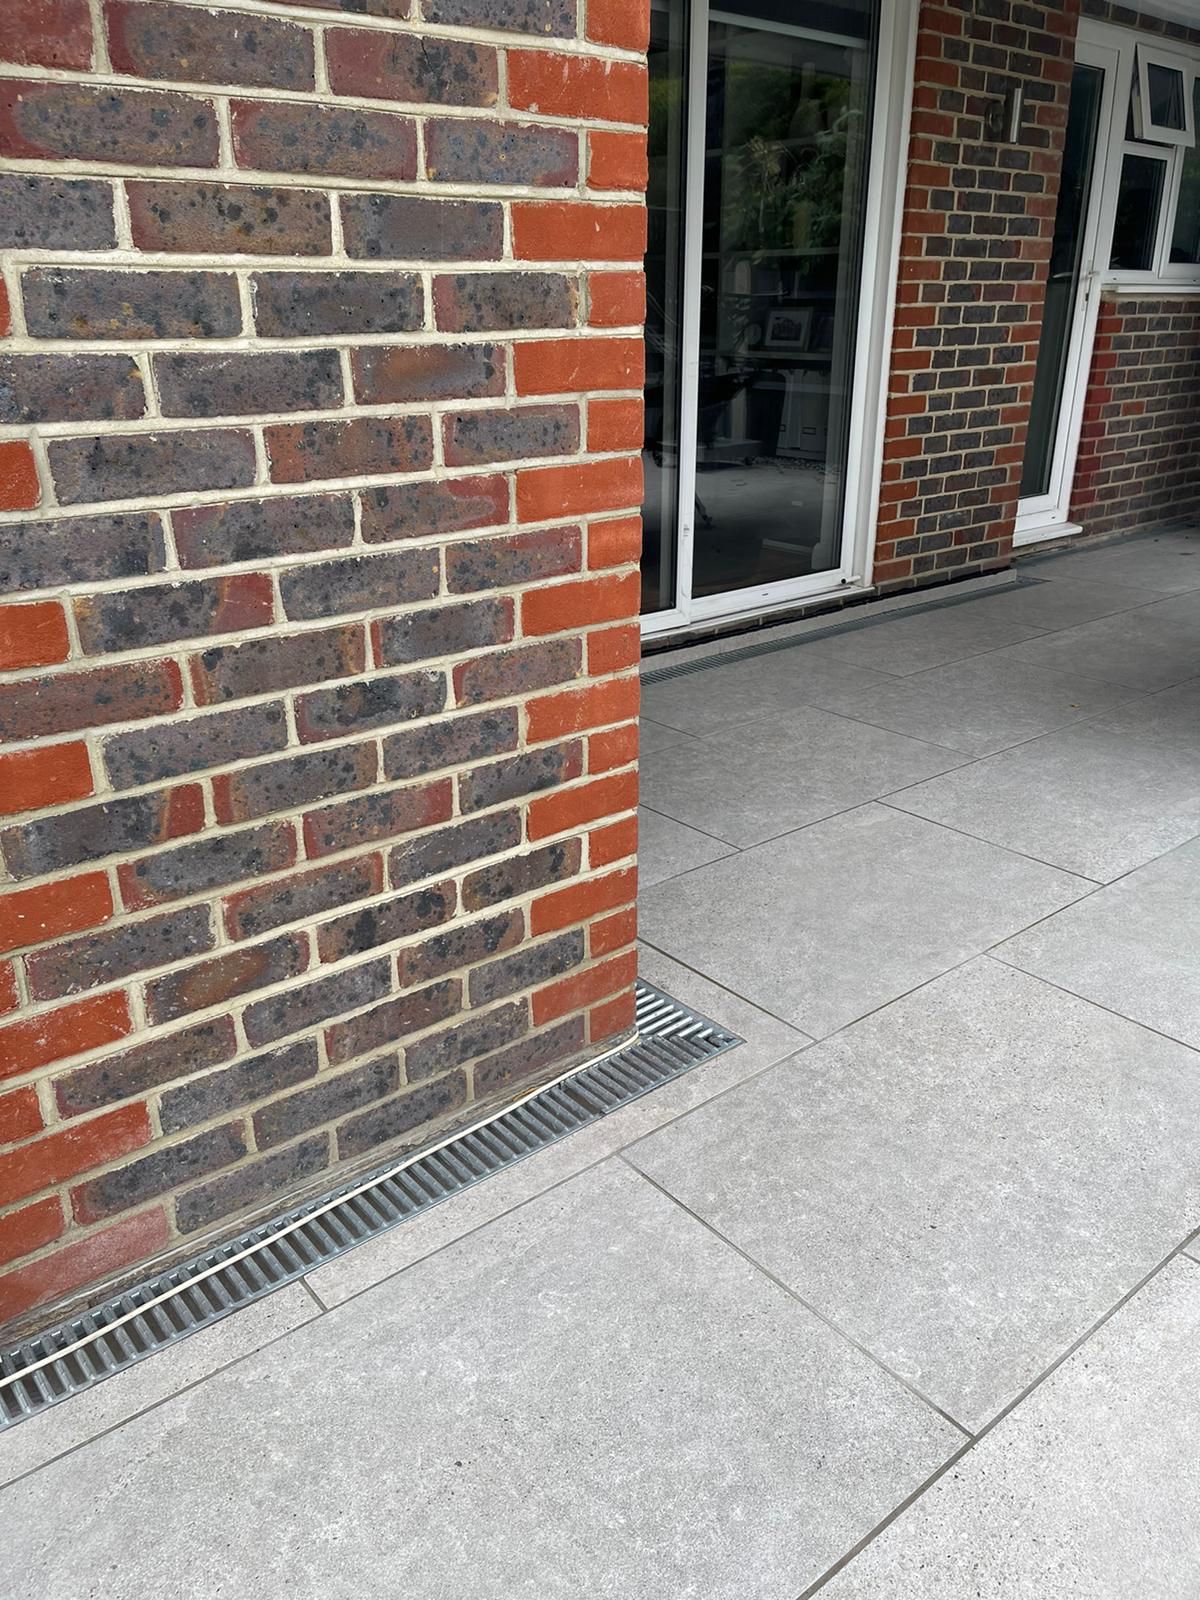 ACOs for surface water drainage from the porcelain patio